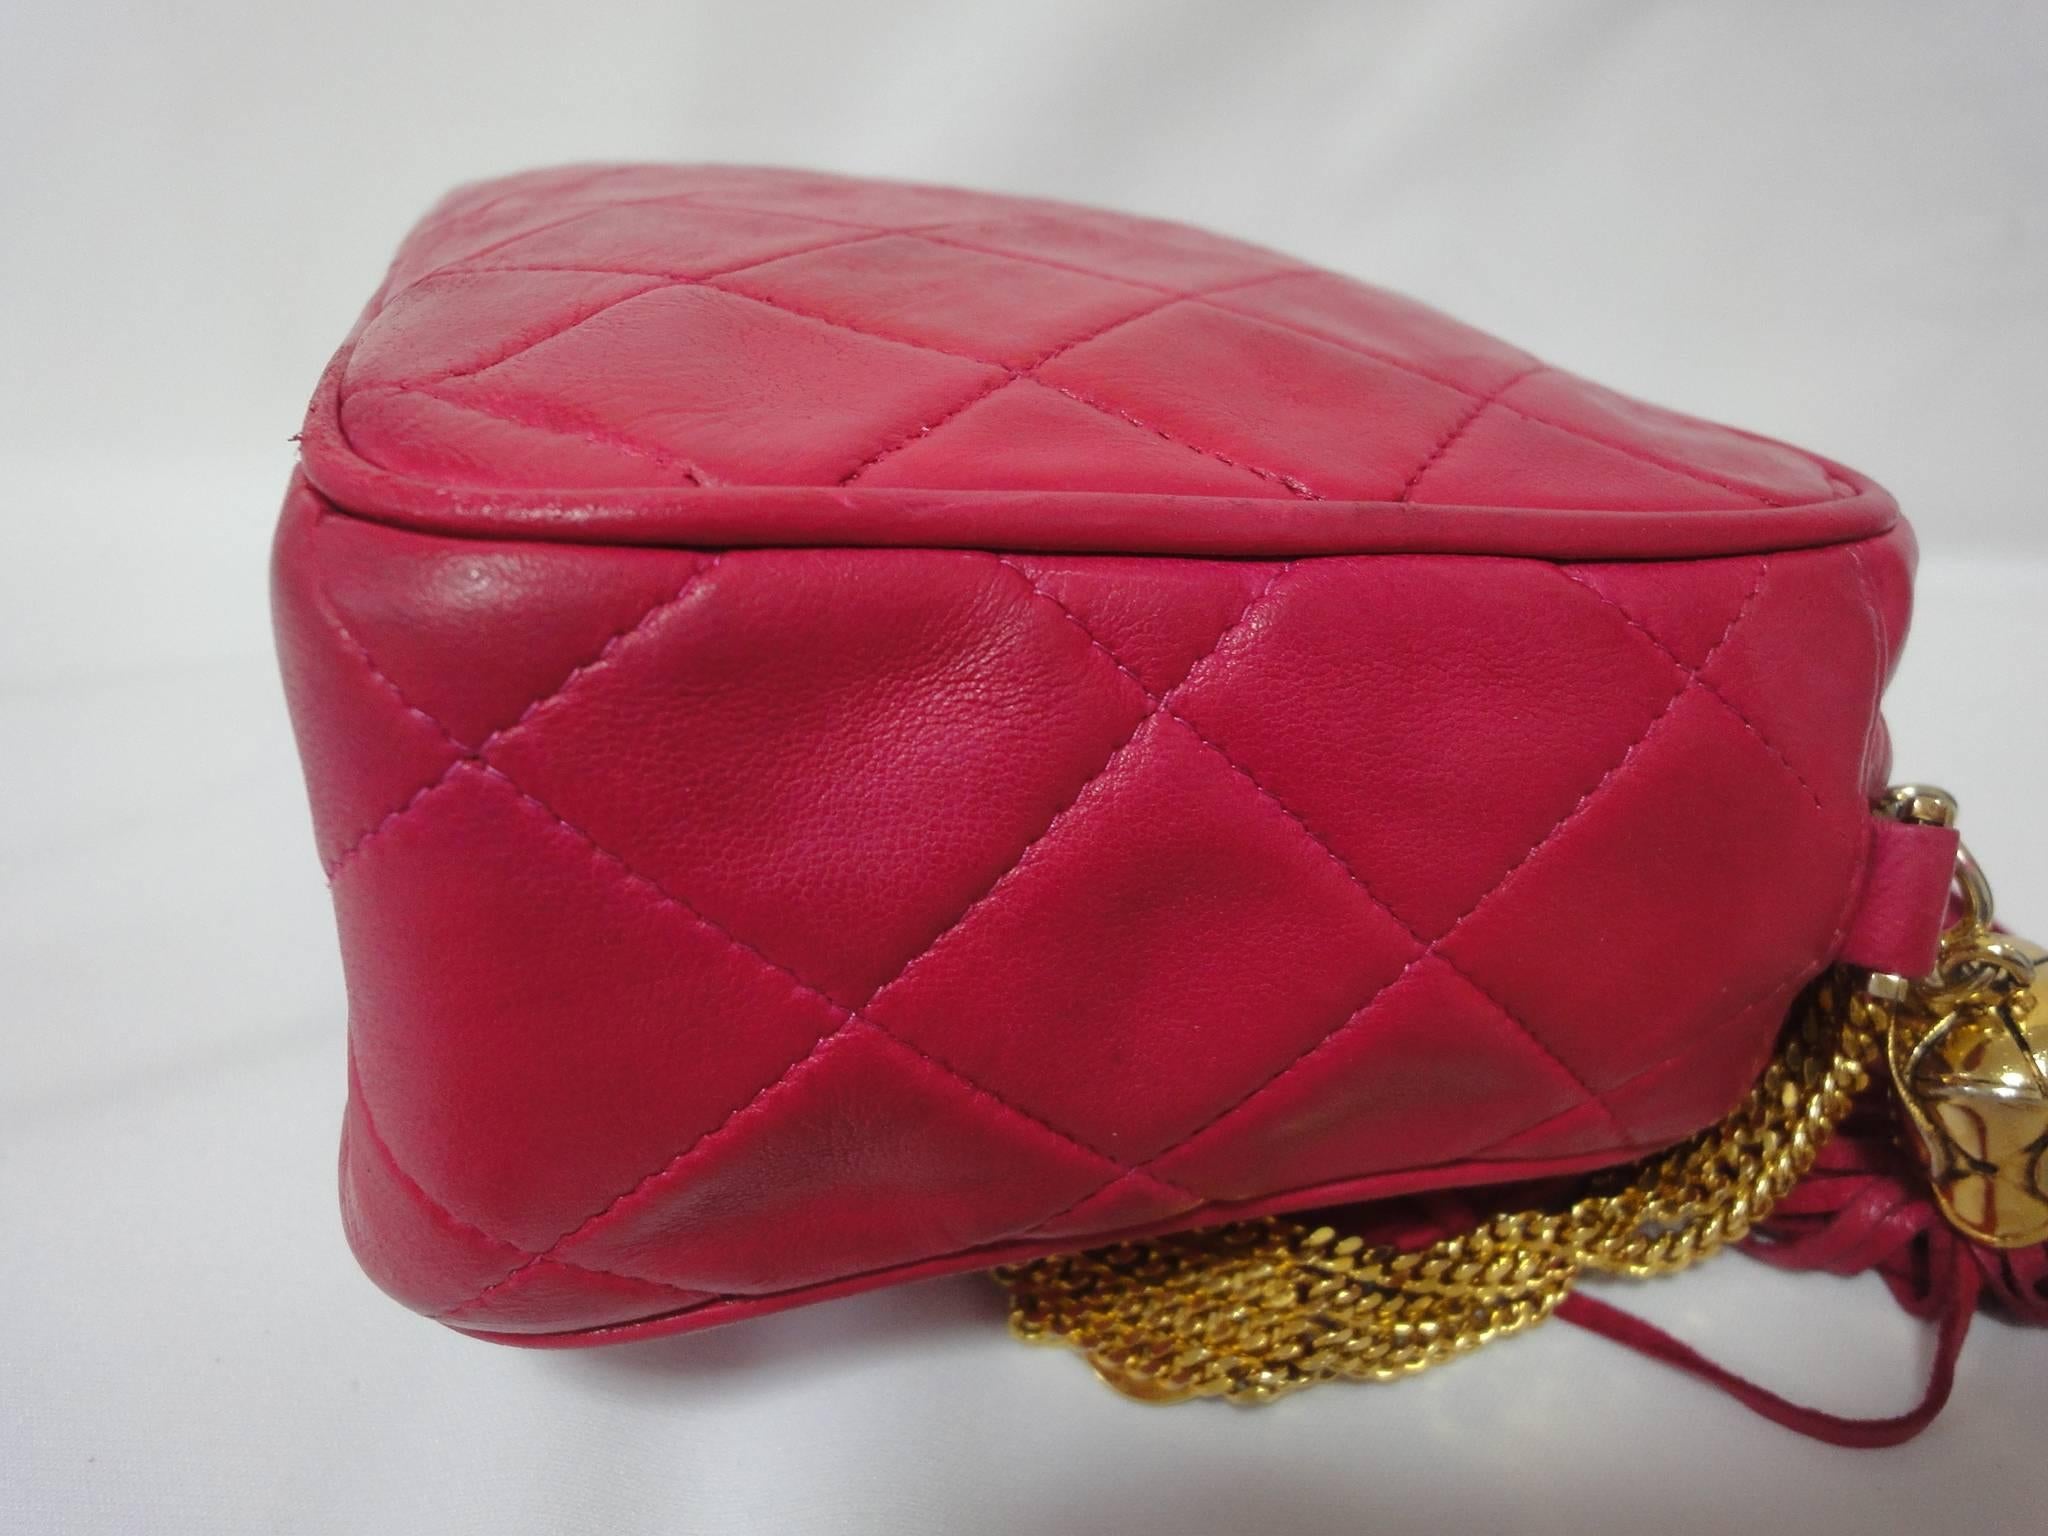 Women's Vintage CHANEL pink lambskin camera bag style jewelry chain shoulder bag. For Sale